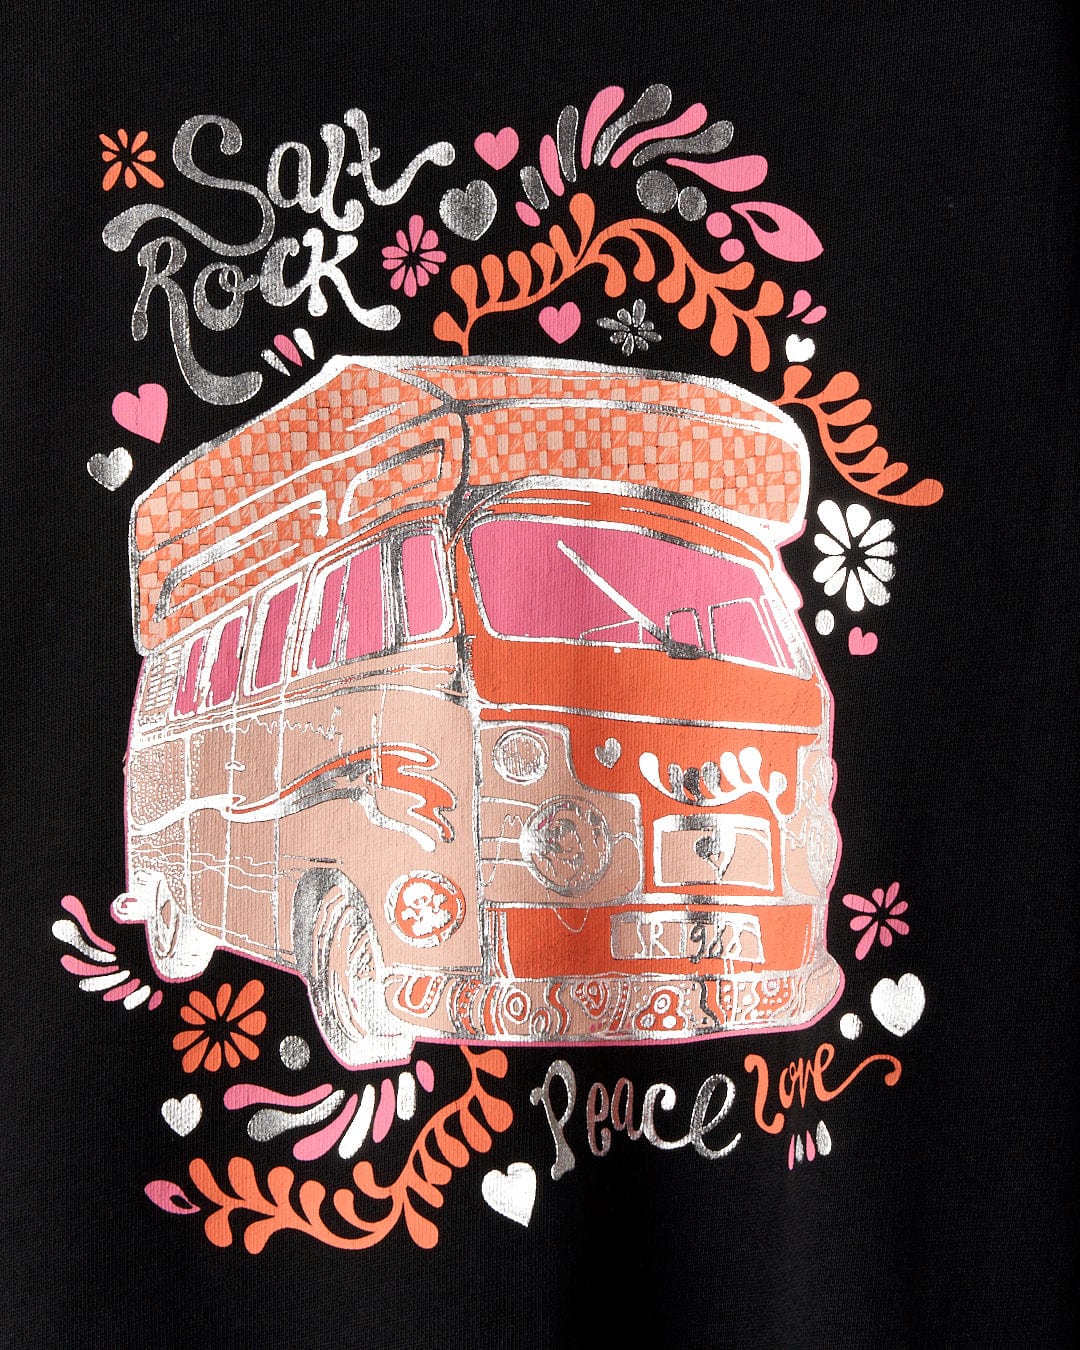 Graphic design of a pink Tahiti Van surrounded by flowers and the text "Saltrock branding" and "peace love" on a black Saltrock full zip hoodie.